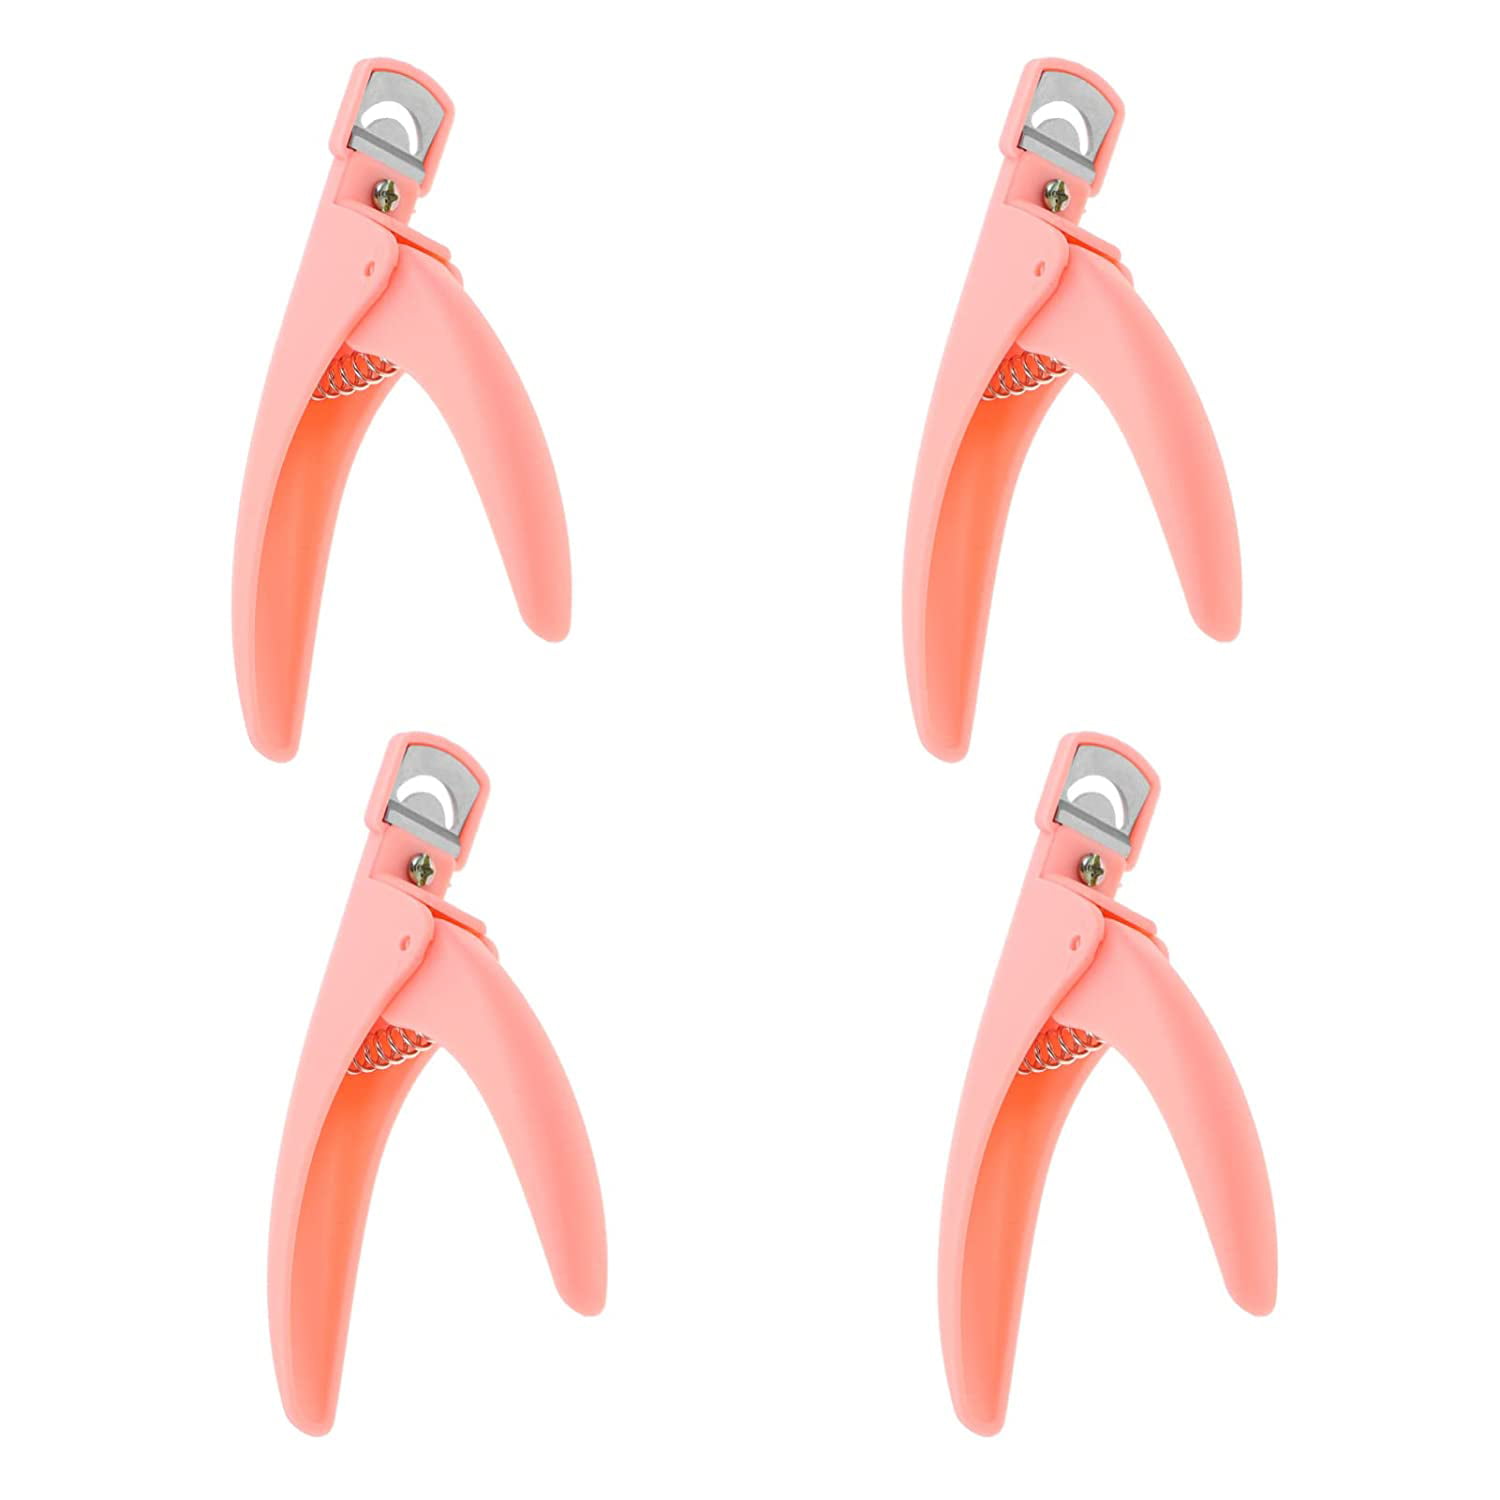 Amazon.com: AmooFro Acrylic False Nail Clippers with Magnets Sizer,Nail Tip  Cutter for False Nails with Length Measurement, Adjustable Stainless Nail  Trimmer, Manicure Tool for Salon Home Nail Art : Beauty & Personal